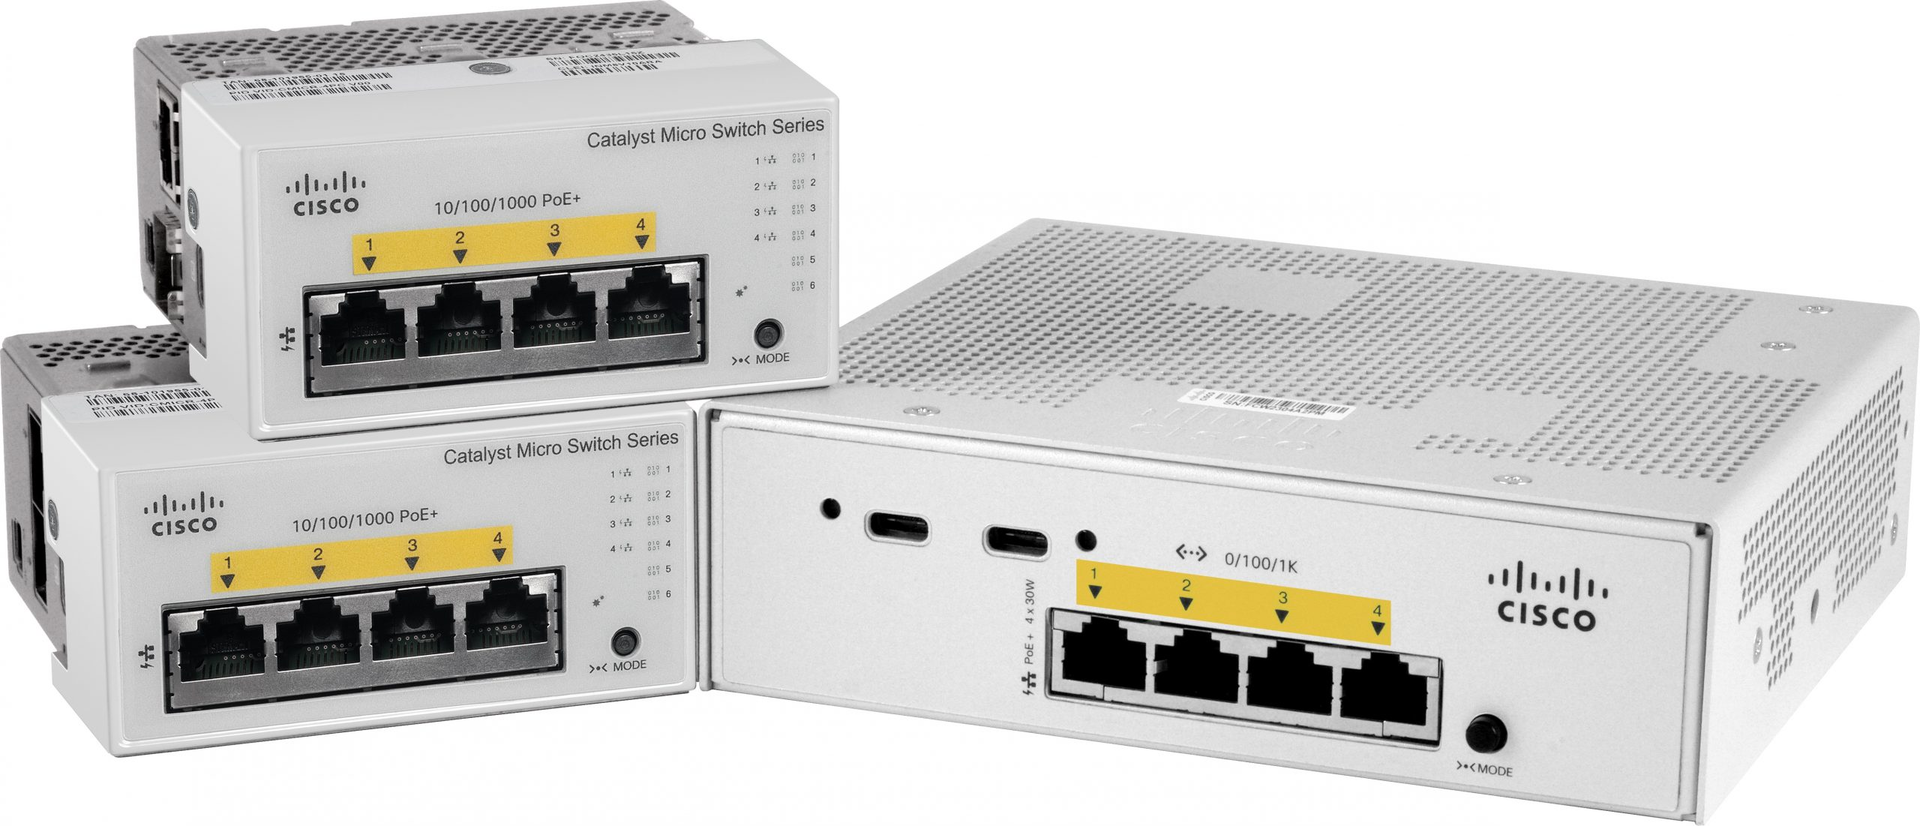 Cisco introduces 4-port PoE+ switches | Cabling Installation \u0026 Maintenance